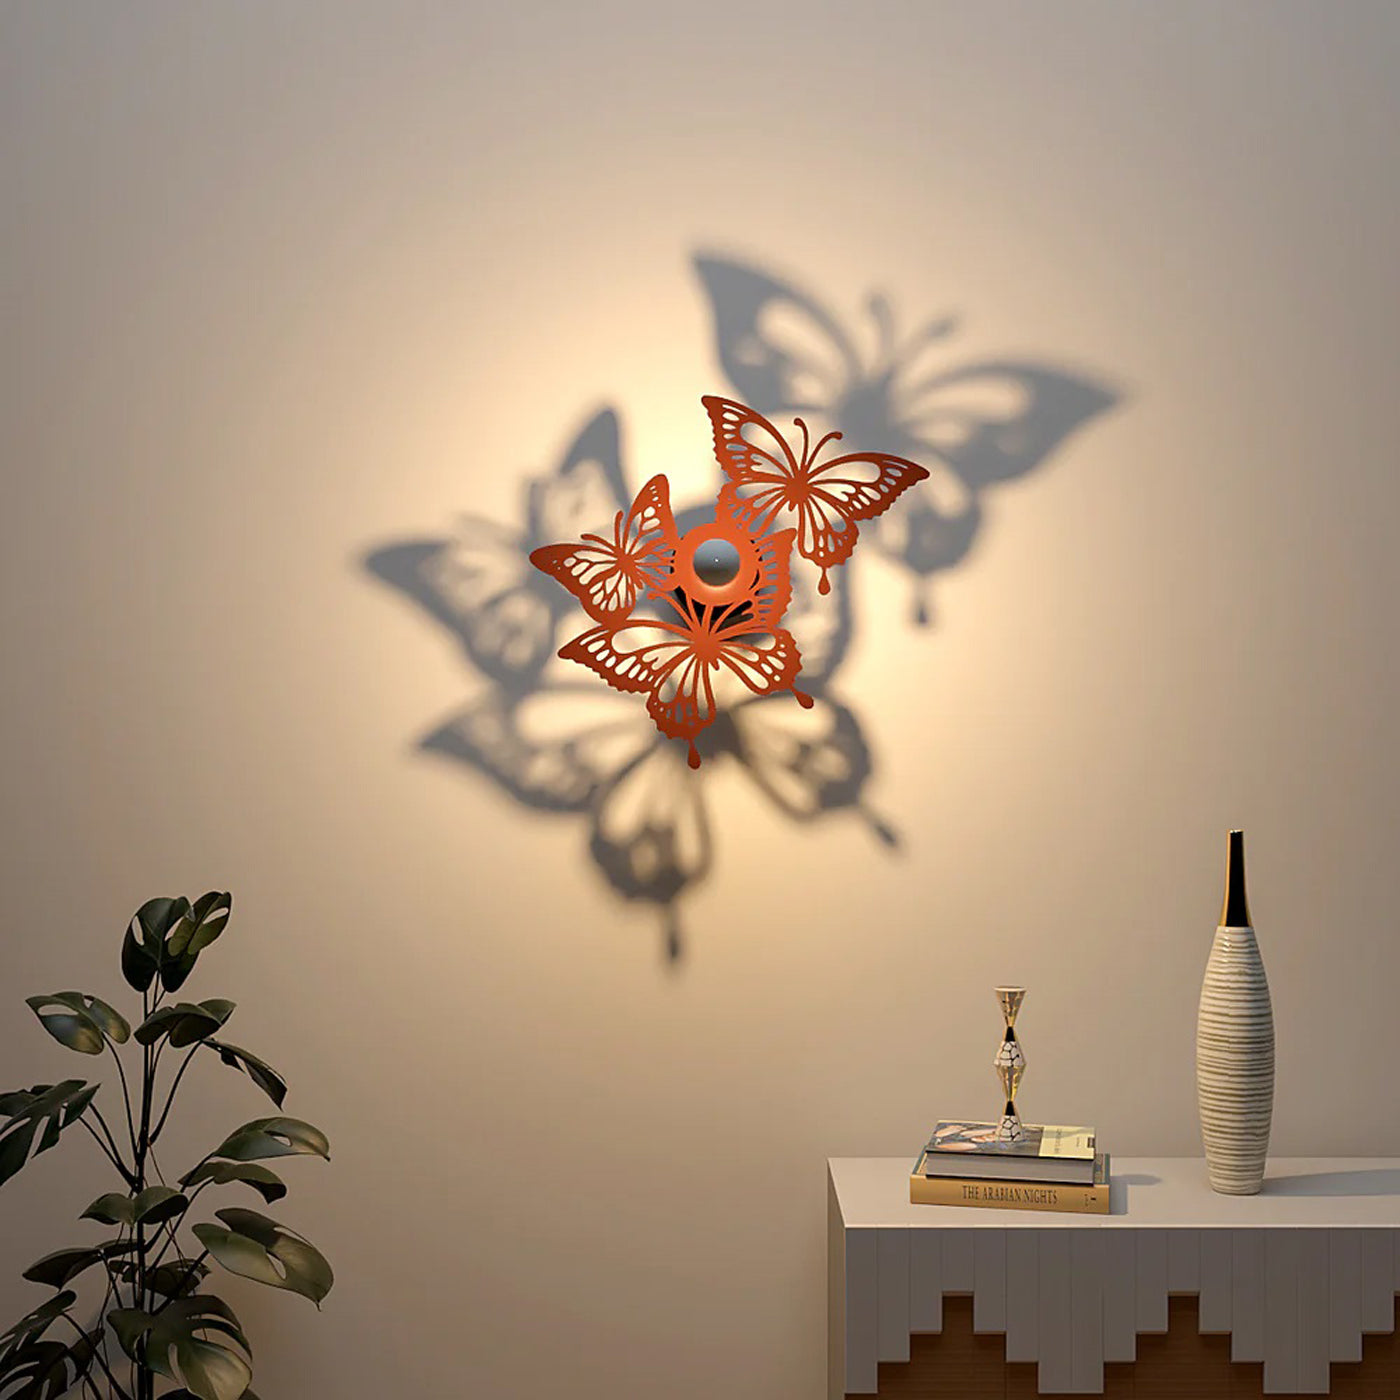 Tittli / Butterfly Shadow lamp for Home / Office wall decor